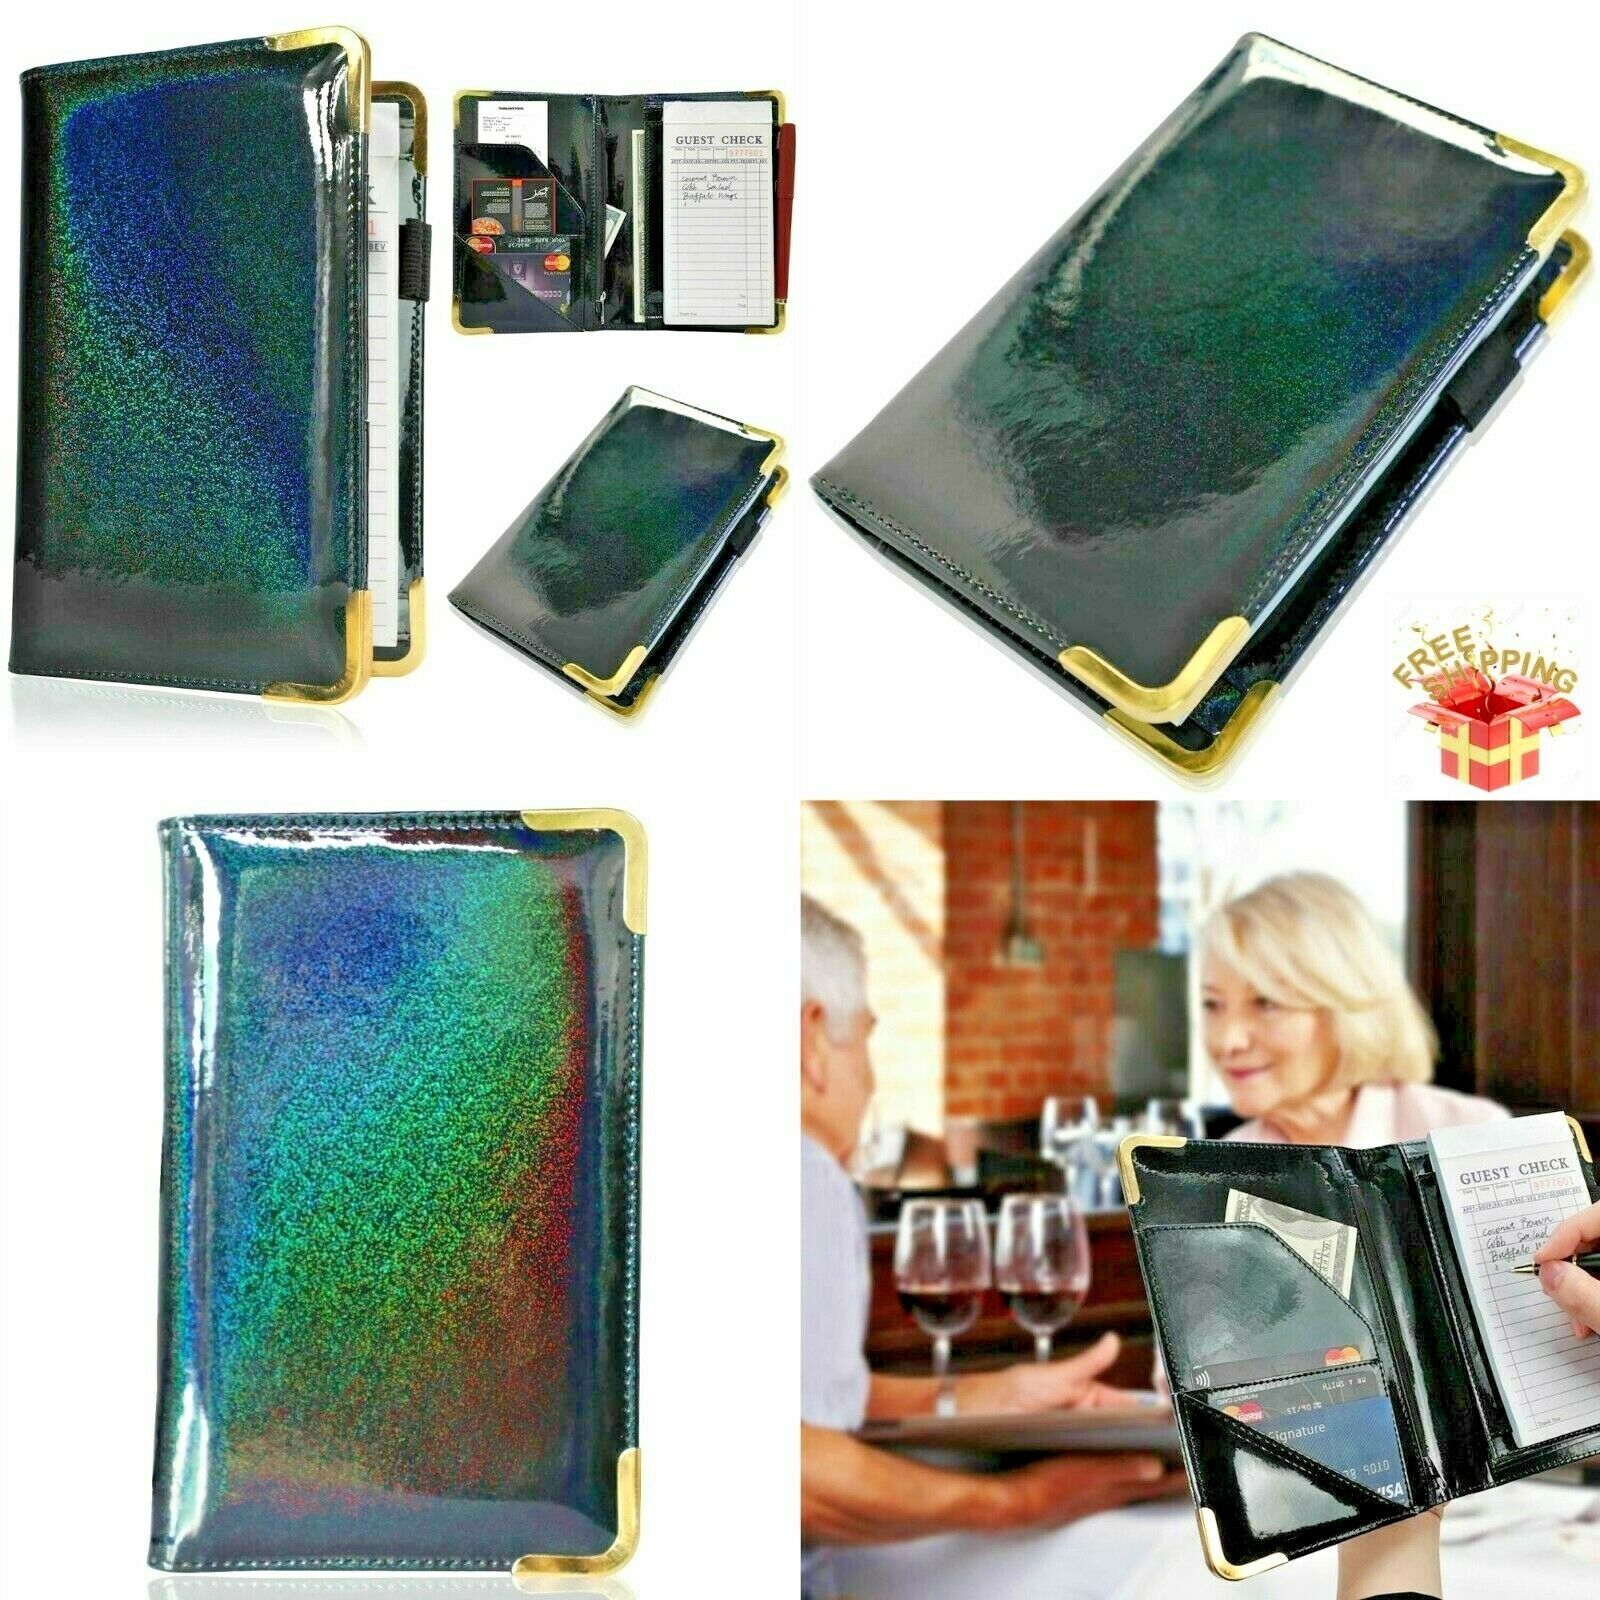 Server Books for Waitress - Glitter Leather Waiter Book Server Wallet with Zi...